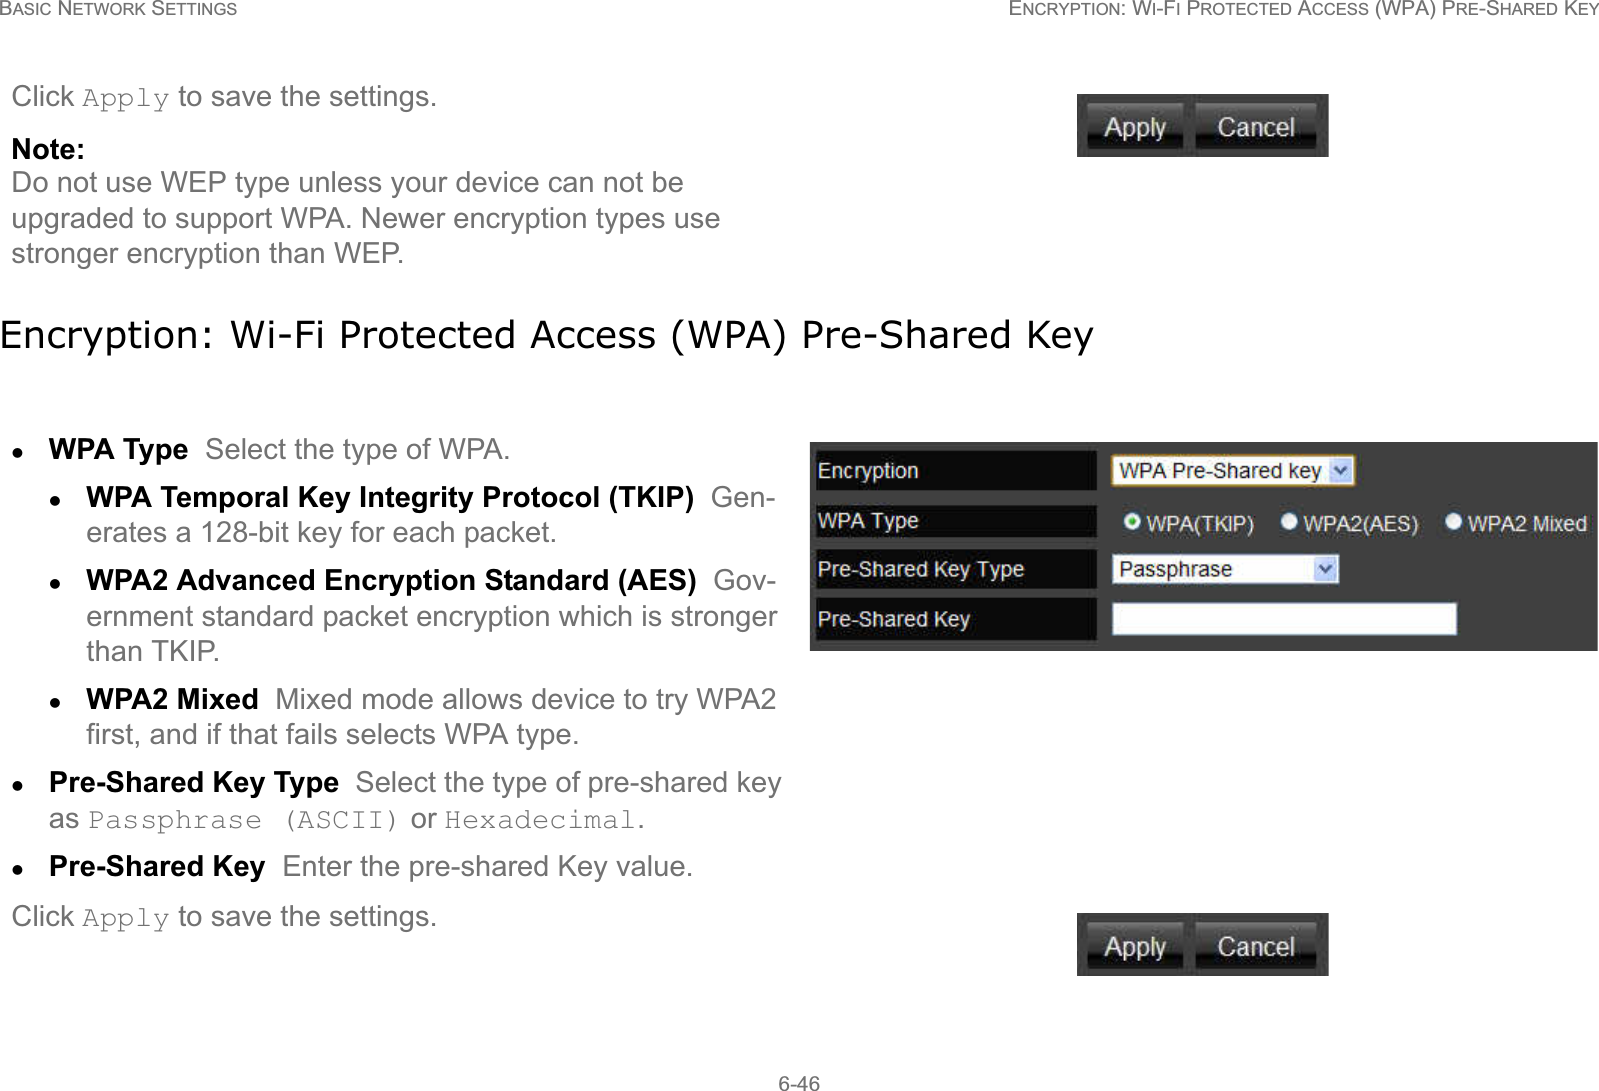 BASIC NETWORK SETTINGS ENCRYPTION: WI-FI PROTECTED ACCESS (WPA) PRE-SHARED KEY6-46Encryption: Wi-Fi Protected Access (WPA) Pre-Shared KeyClick Apply to save the settings.Note:Do not use WEP type unless your device can not be upgraded to support WPA. Newer encryption types use stronger encryption than WEP.zWPA Type  Select the type of WPA. zWPA Temporal Key Integrity Protocol (TKIP)  Gen-erates a 128-bit key for each packet.zWPA2 Advanced Encryption Standard (AES)  Gov-ernment standard packet encryption which is stronger than TKIP.zWPA2 Mixed  Mixed mode allows device to try WPA2 first, and if that fails selects WPA type.zPre-Shared Key Type  Select the type of pre-shared key as Passphrase (ASCII) or Hexadecimal.zPre-Shared Key  Enter the pre-shared Key value.Click Apply to save the settings.